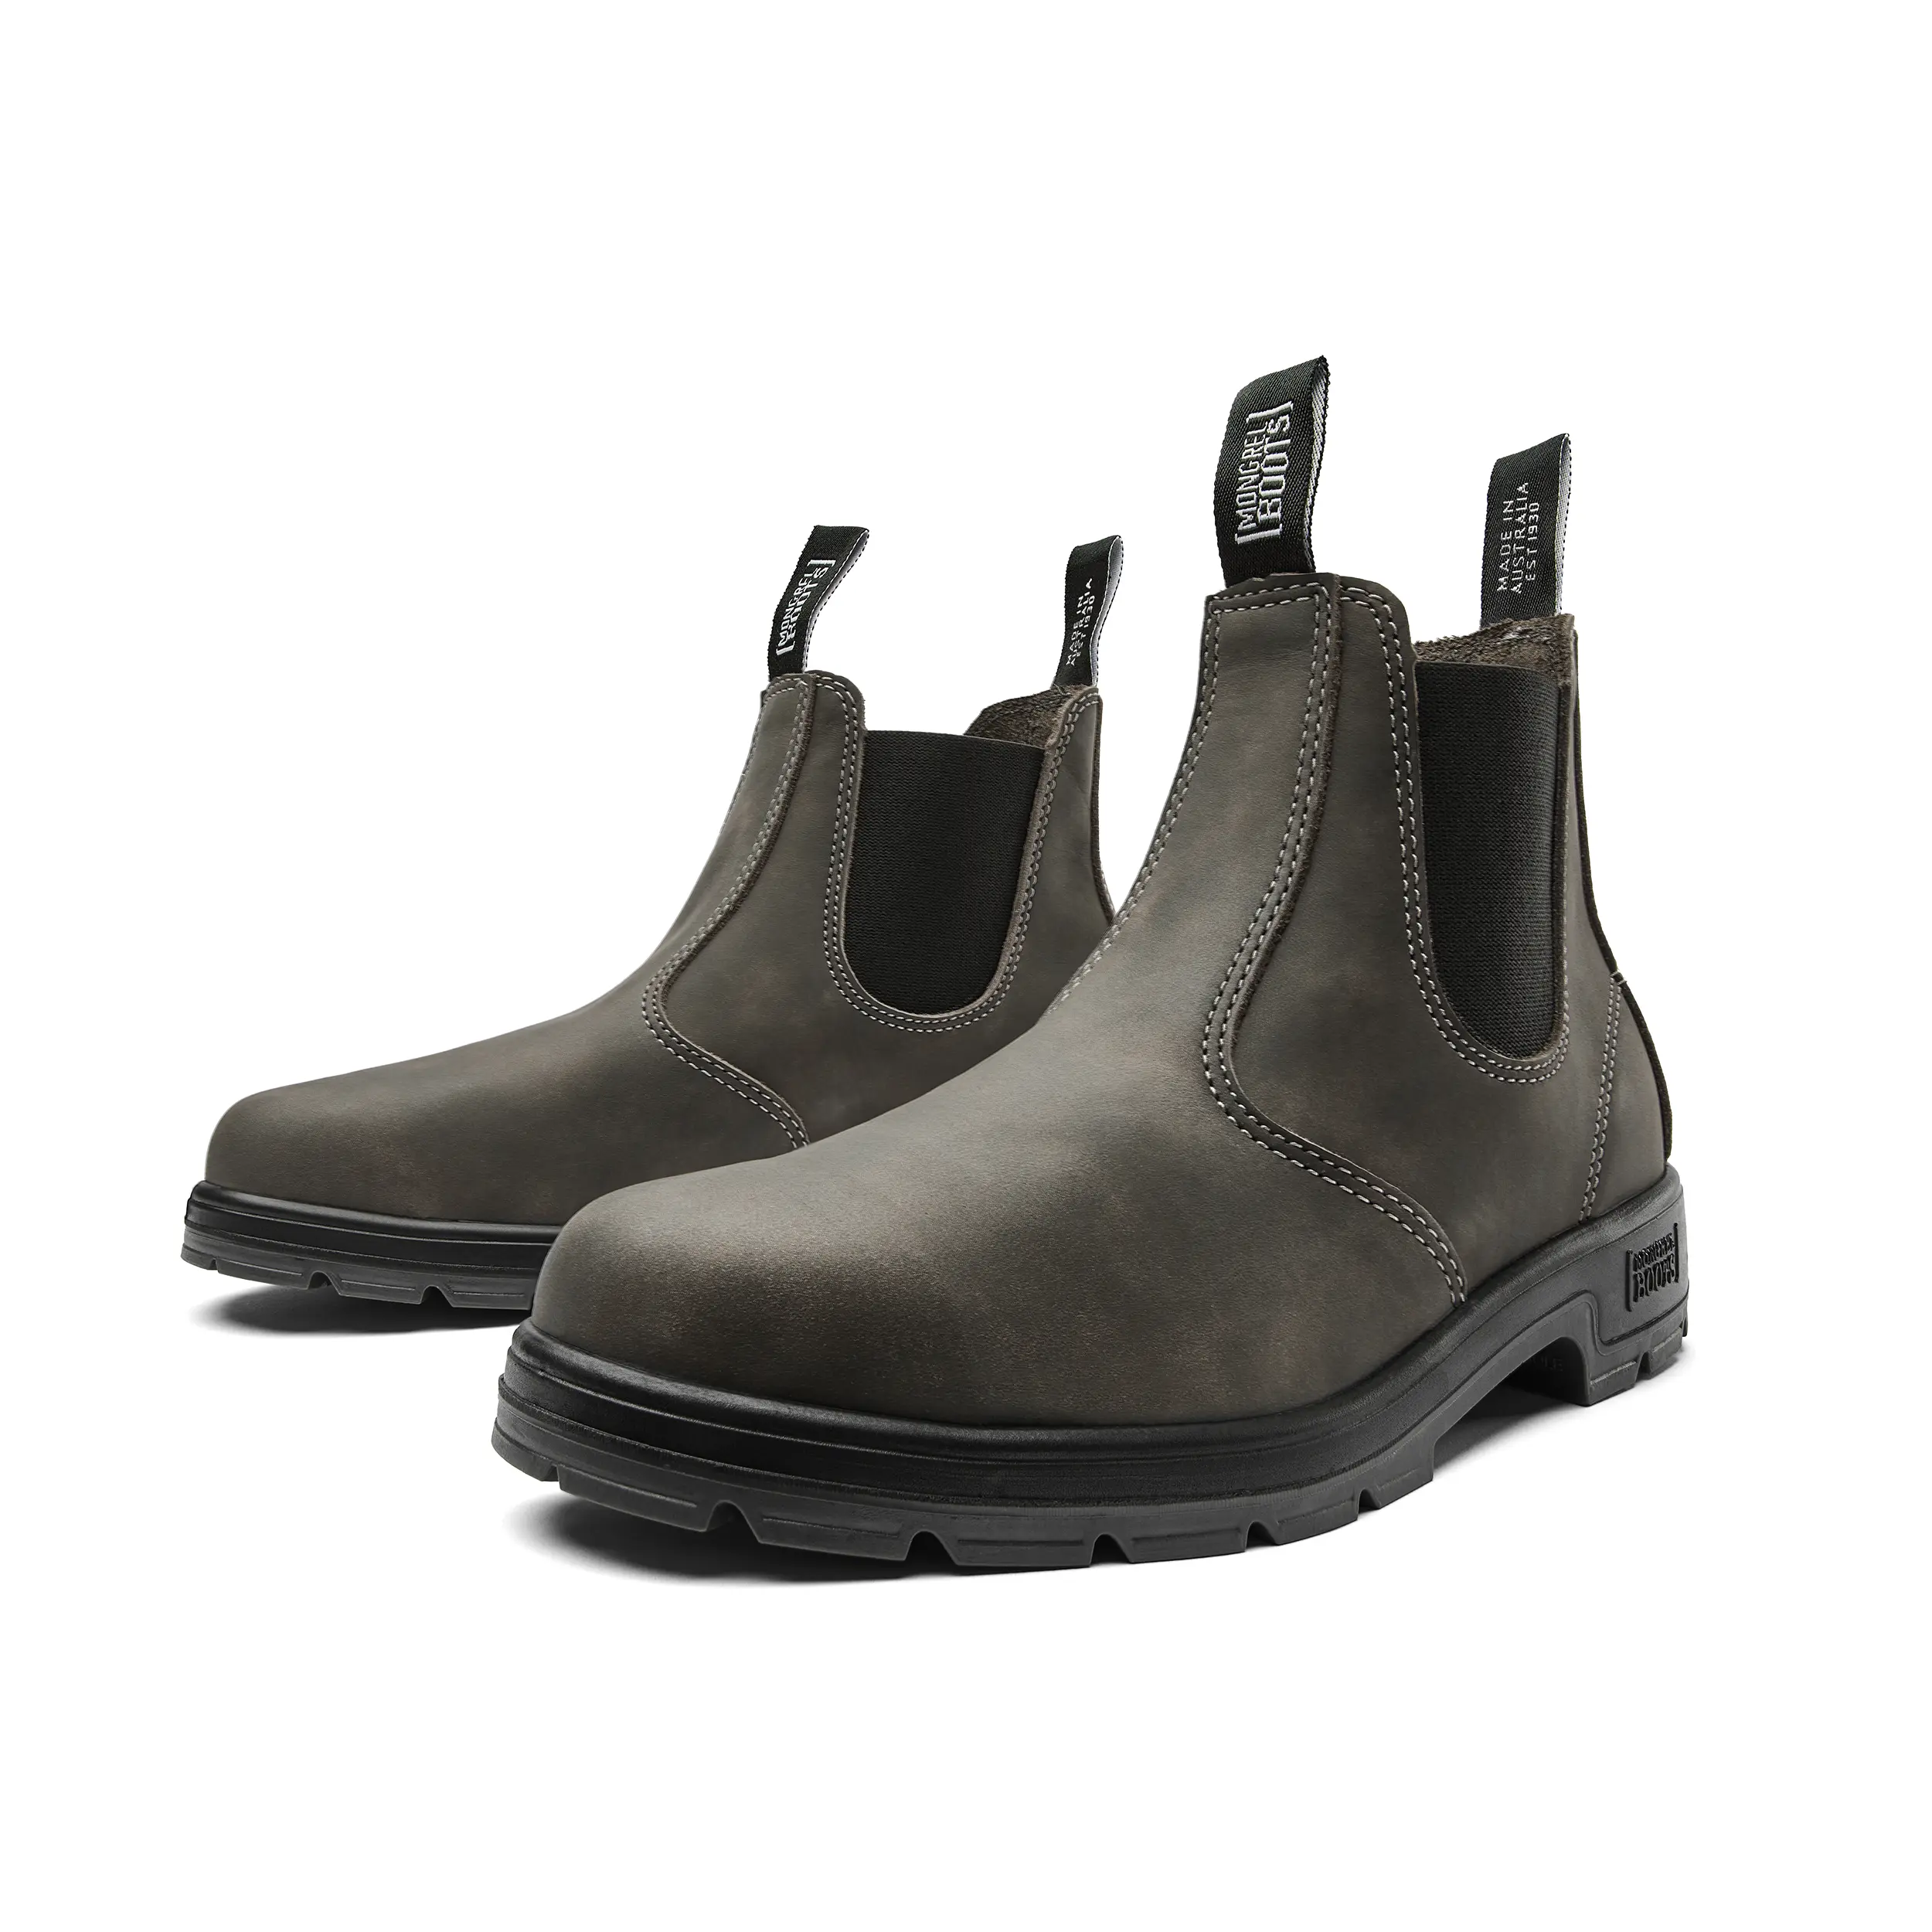 CLOUDY GREY ELASTIC SIDED BOOT